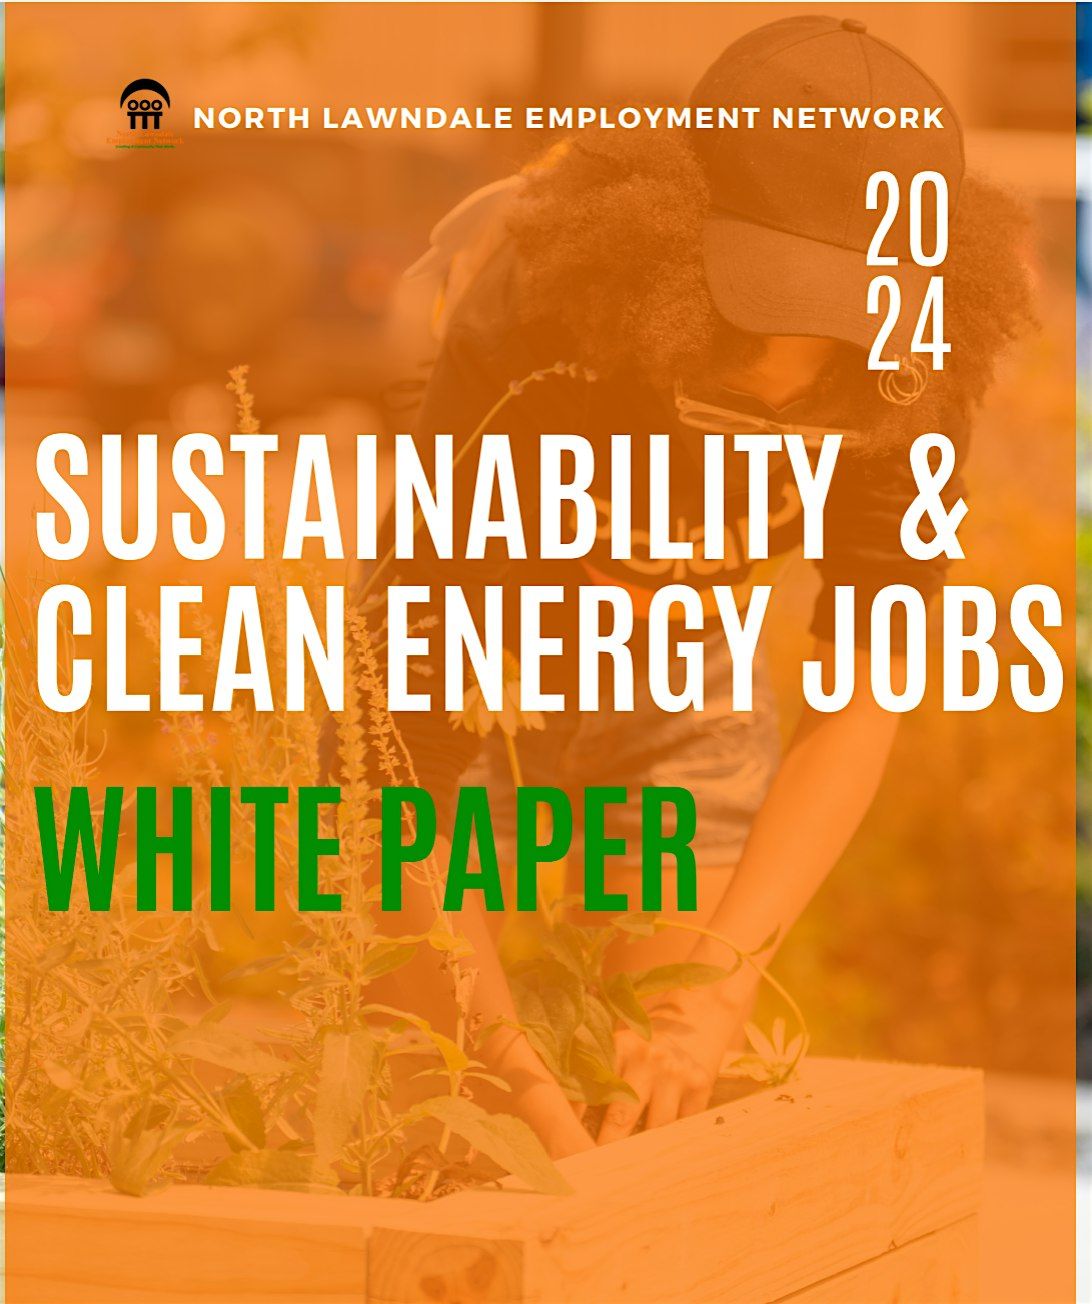 Sustainability and Clean Energy Jobs White Paper Launch!